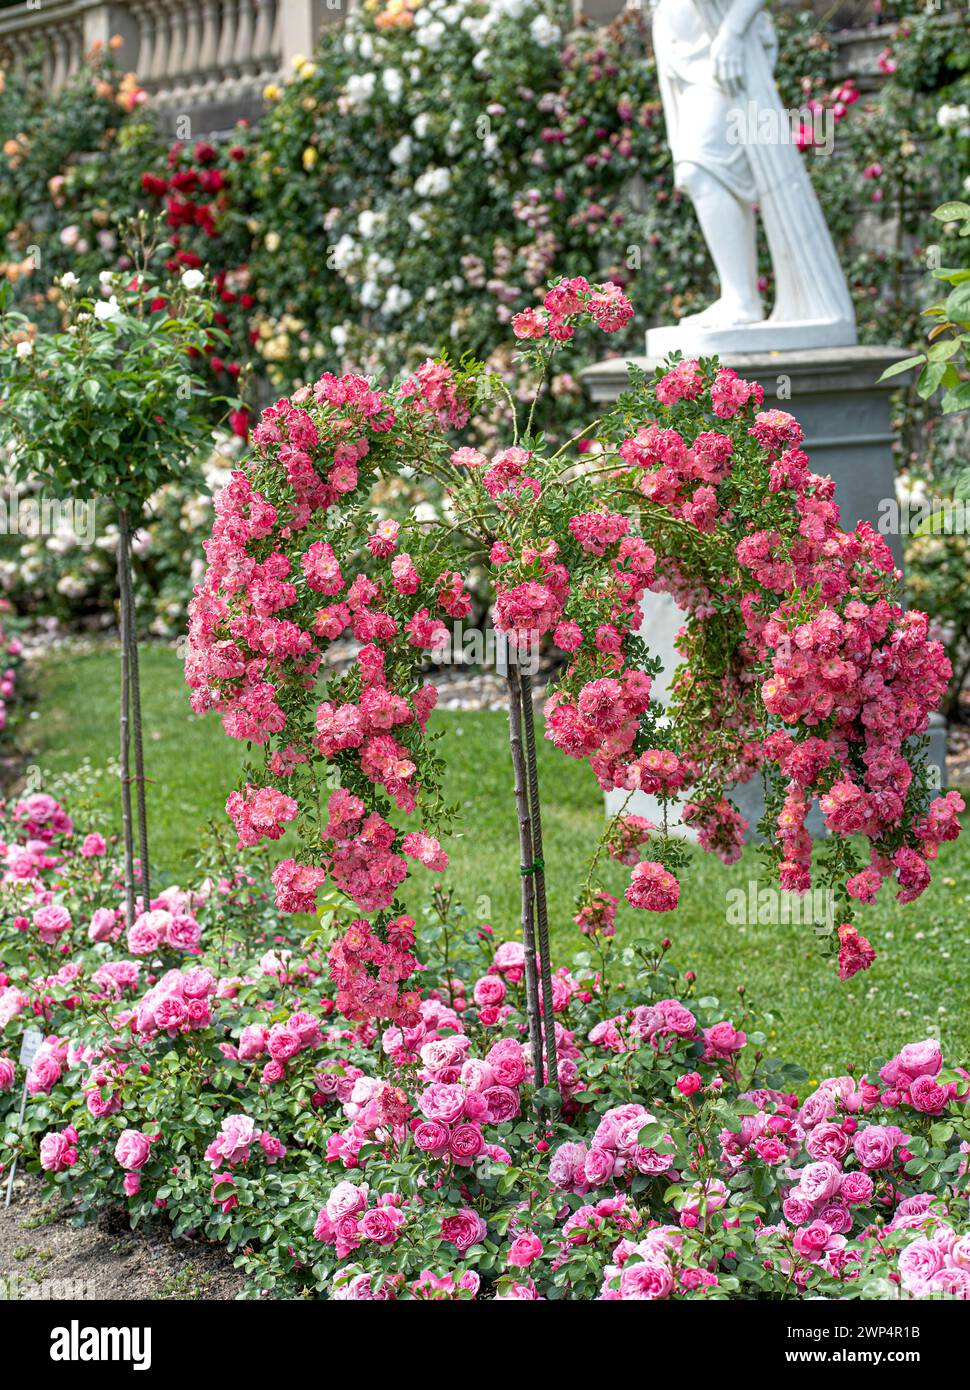 Ground cover rose (Rosa FERDY), Anchers Havecenter, Constance, Baden-Wuerttemberg, Germany Stock Photo